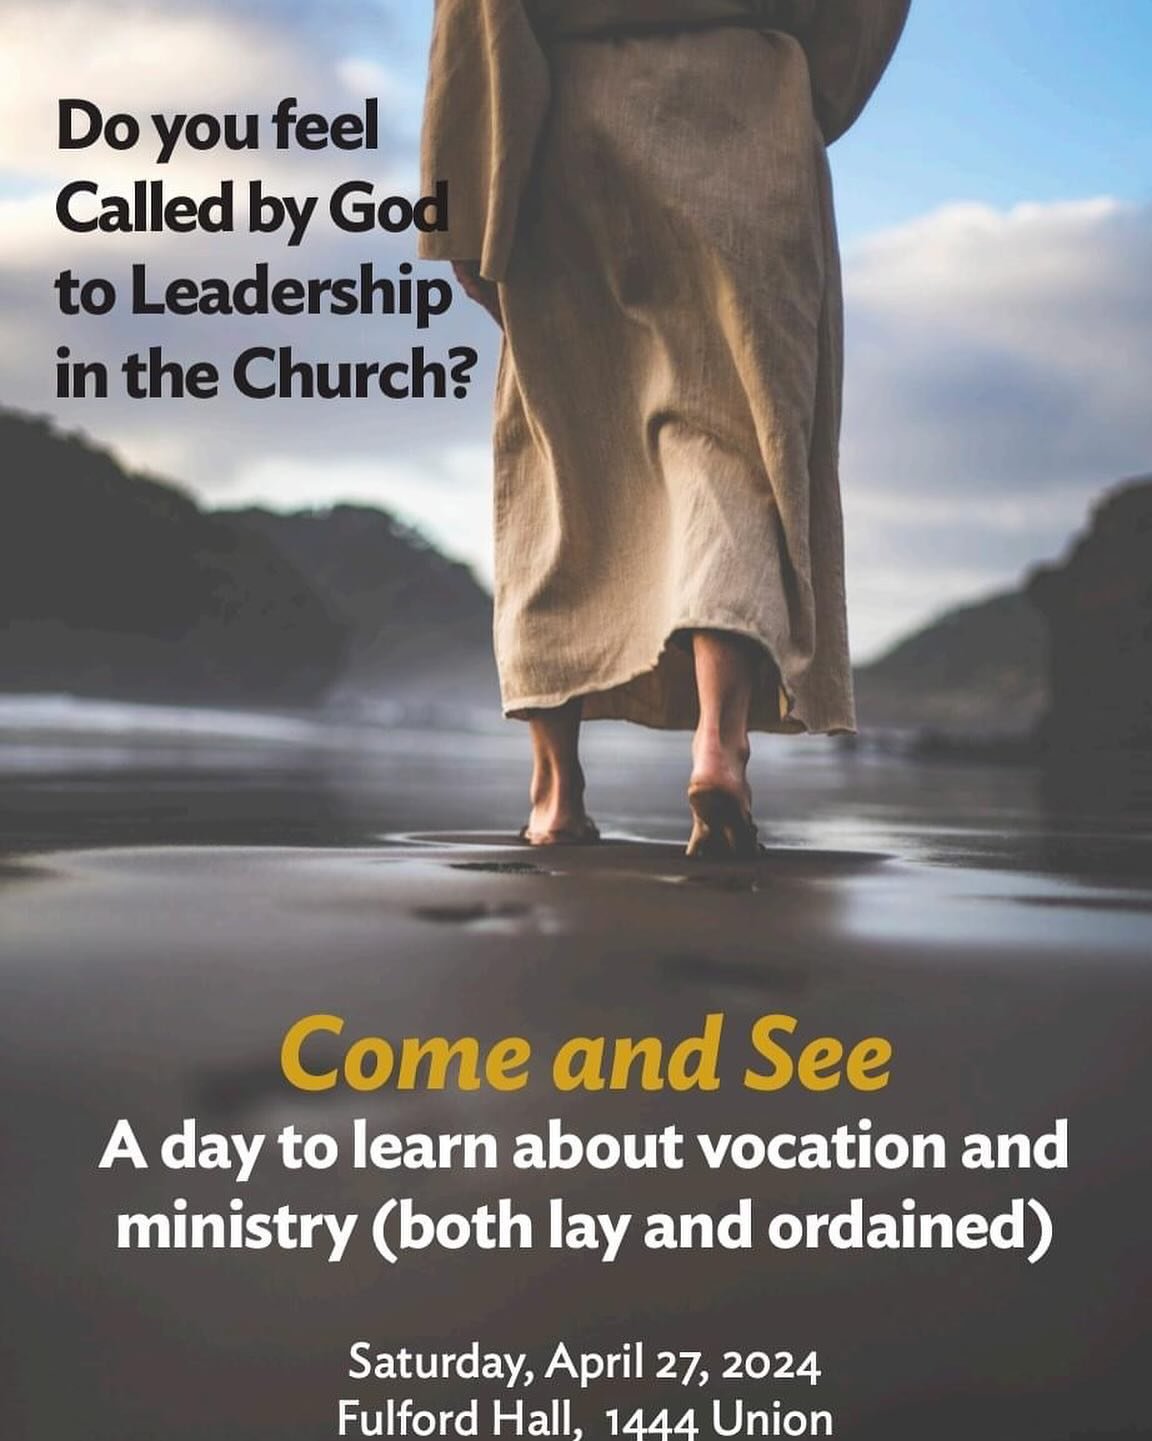 Everyone has a Vocation. What might God be calling you to be and do?
&ldquo;A call to ministry can be held alongside other vocations, or it
might be a disciple&rsquo;s main vocation. In the New Testament &lsquo;ministry&rsquo; is a public and commiss